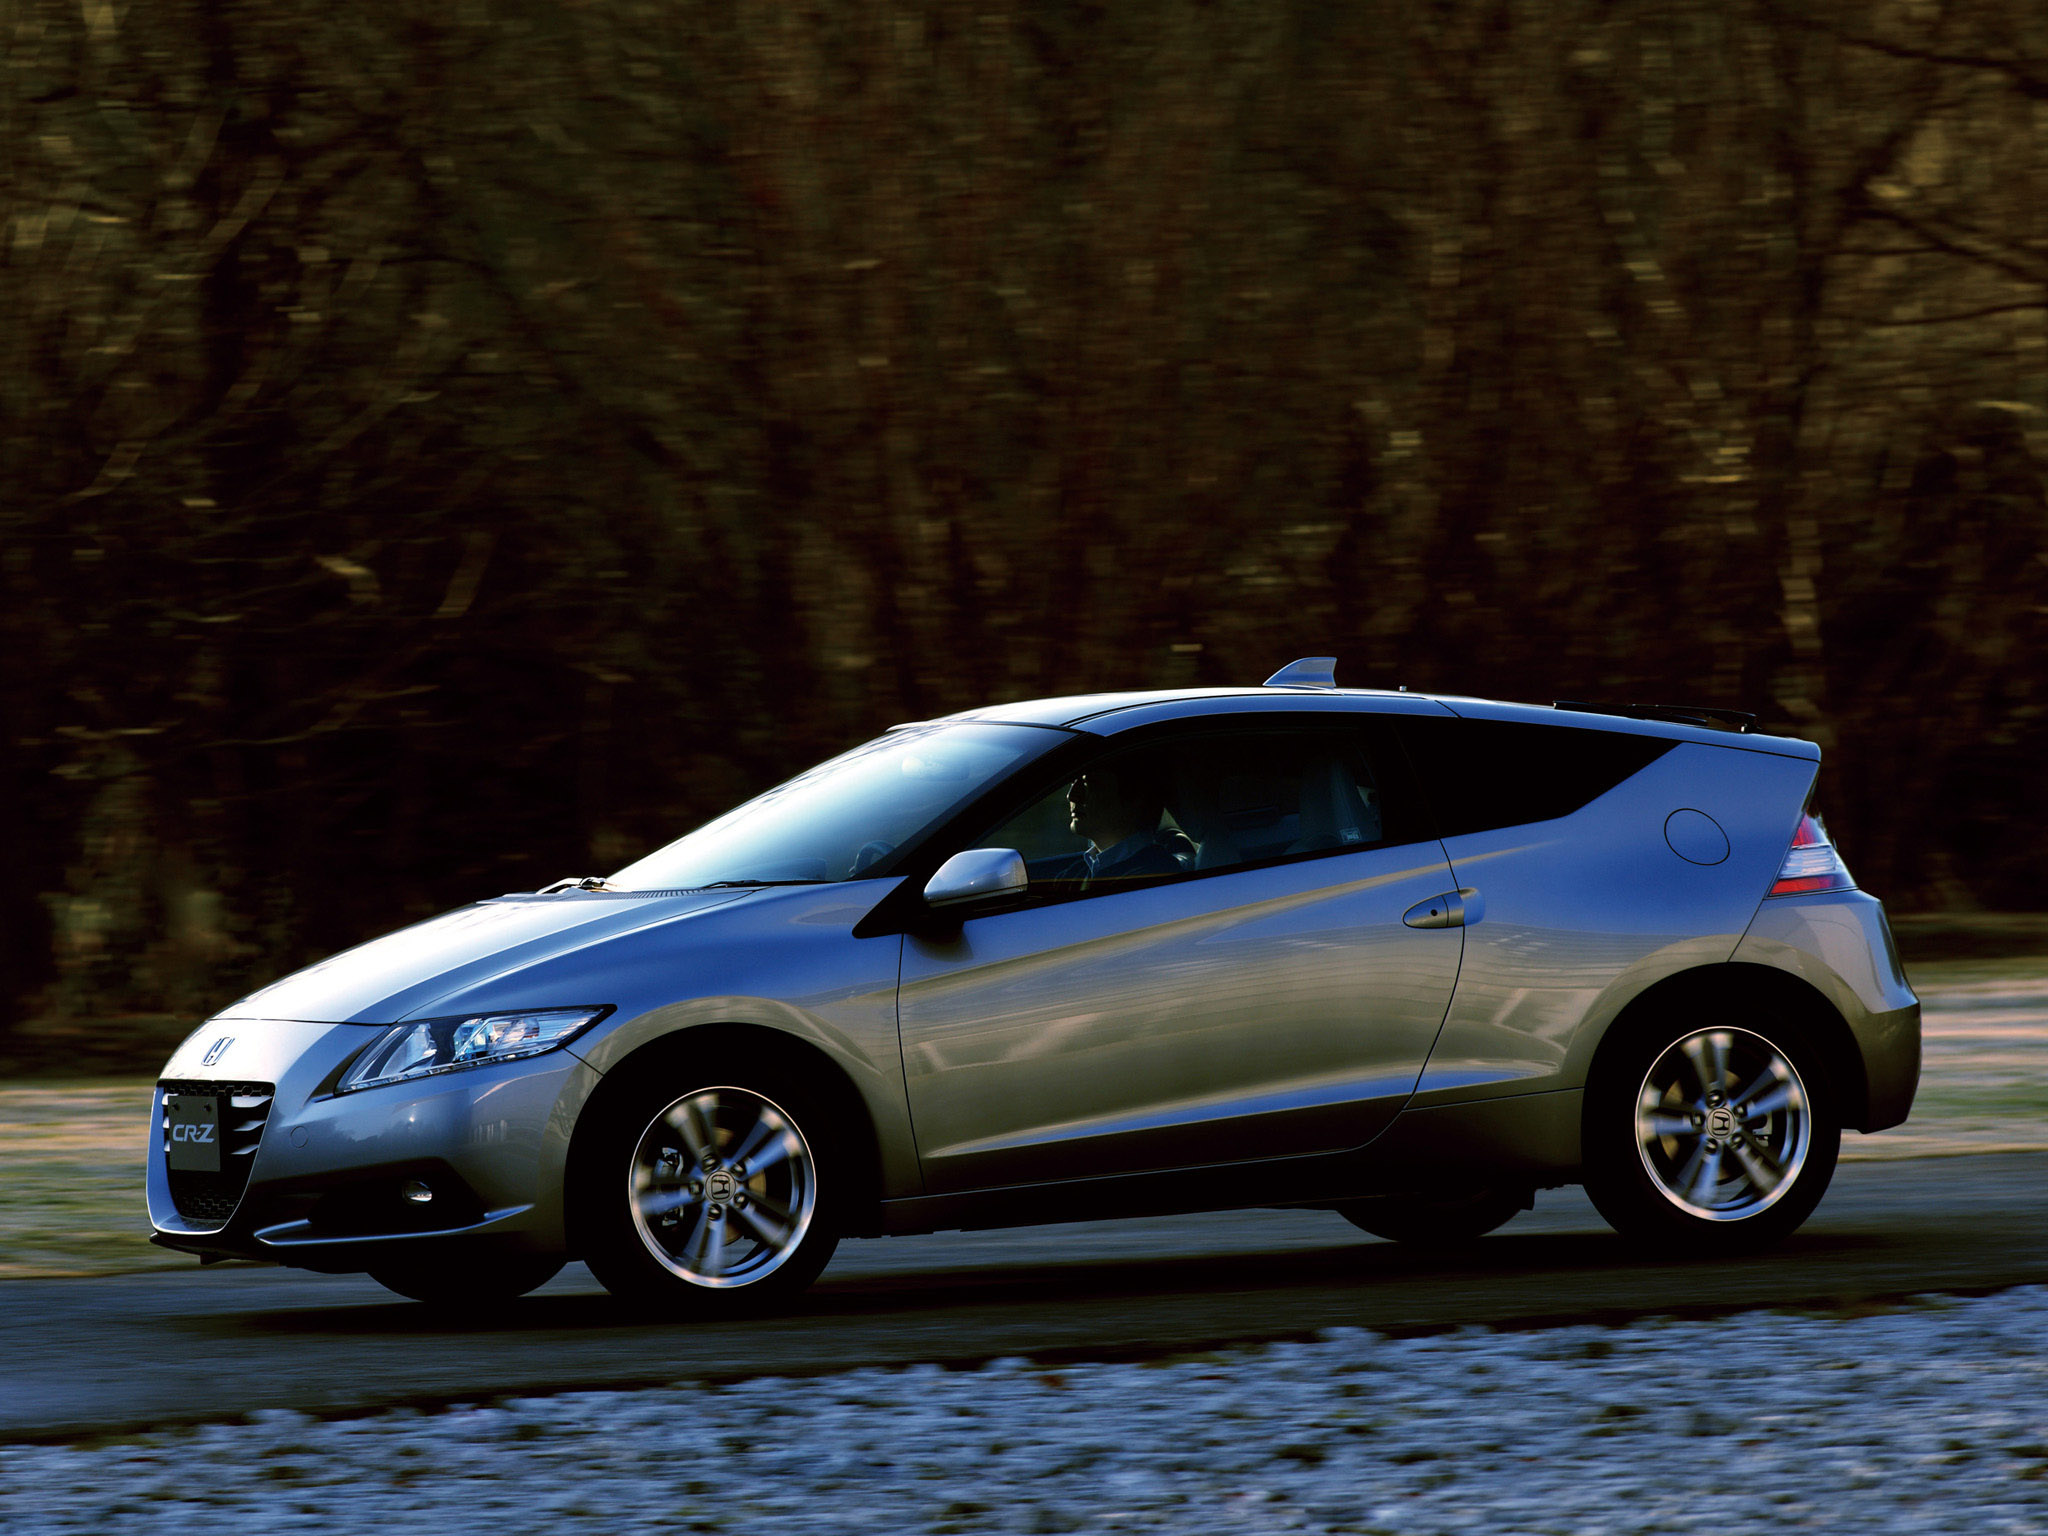 Car in pictures - car photo gallery " Honda cr-z japan 2010 Photo 03.